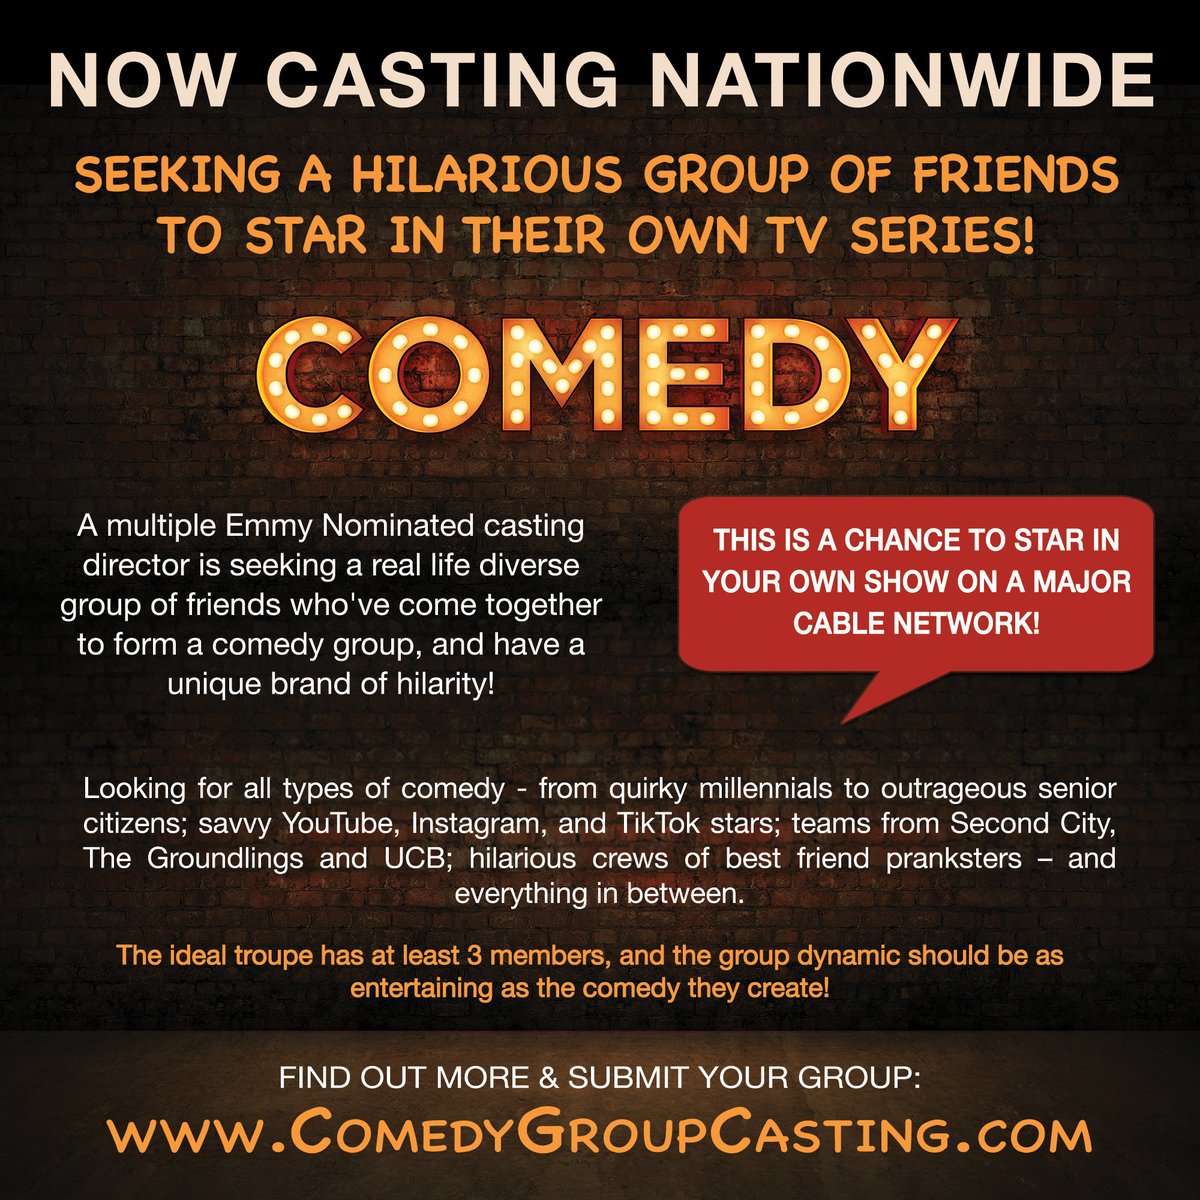 Calling all comedy groups! #improv #comedygroup #comedytroupe #comedians #pranksters #comedyteam #improvcomedy #improvgroup #impracticaljokers #snl #saturdaynightlive #secondcity #uprightcitizensbrigade #ubc #groundlings #jackass #funnyvideos